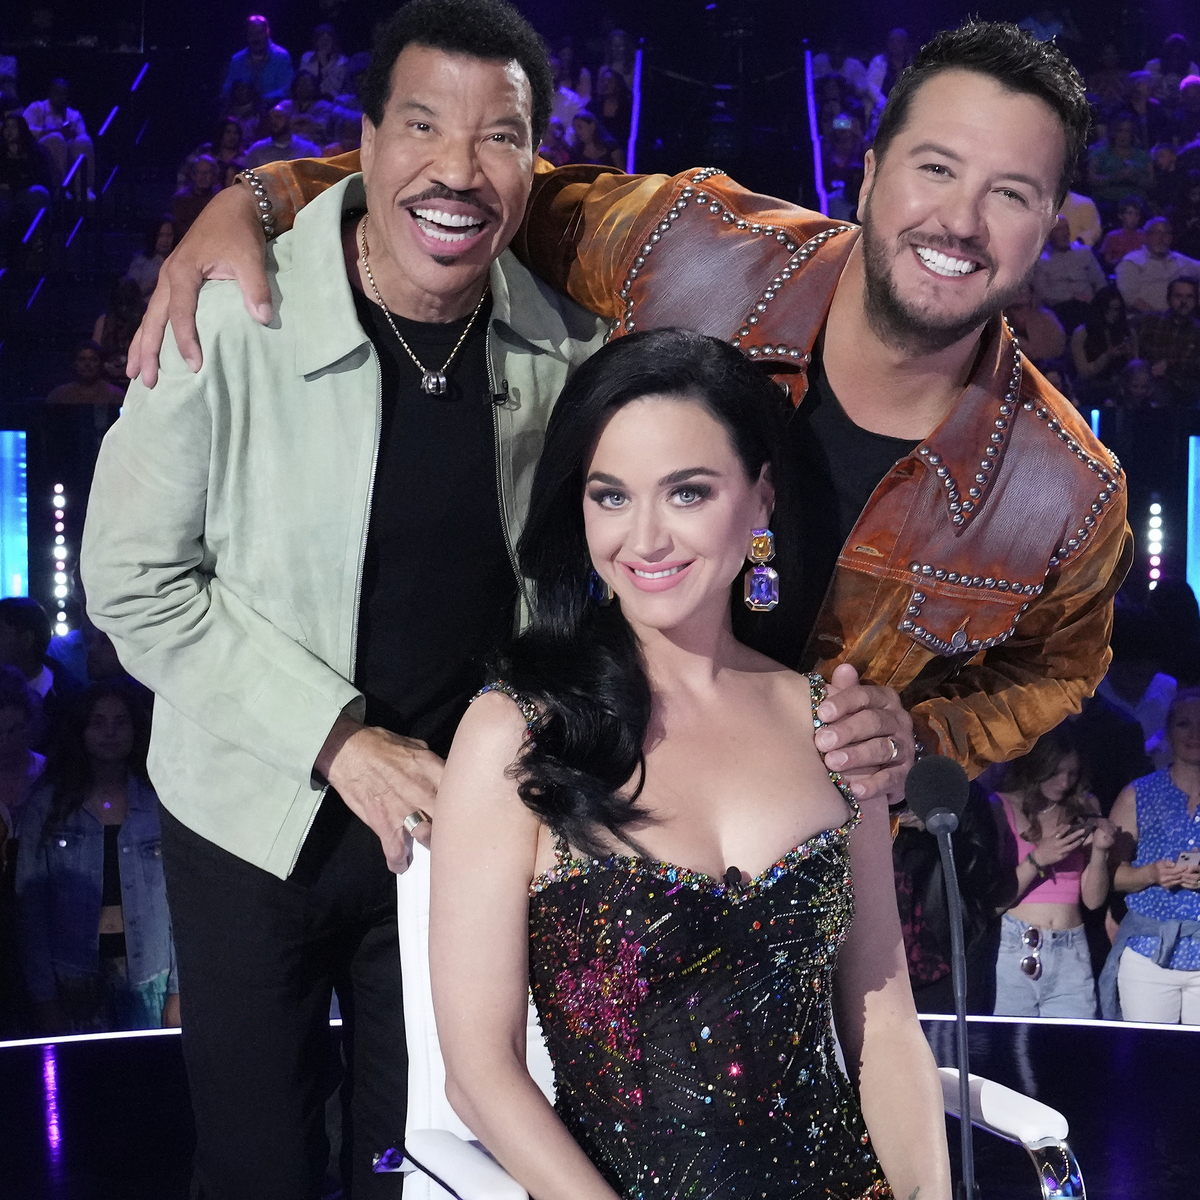 Why Luke Bryan Isn't Shocked About Katy Perry's Departure From American Idol